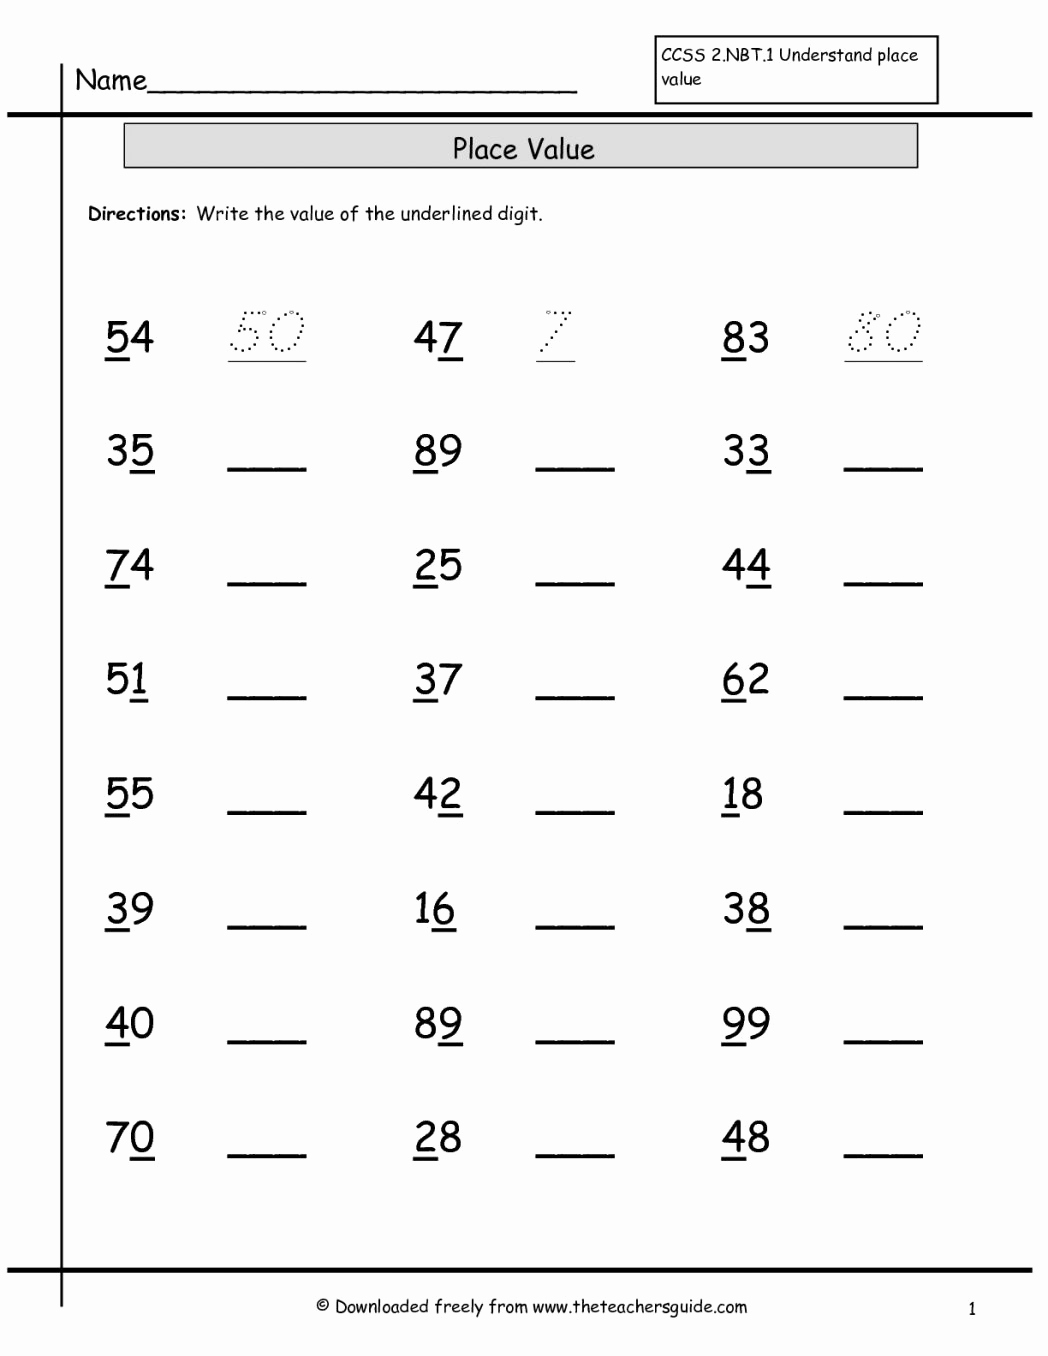 Place Value Worksheet 3rd Grade Awesome Place Value Worksheets 3rd Grade to Learning Place Value